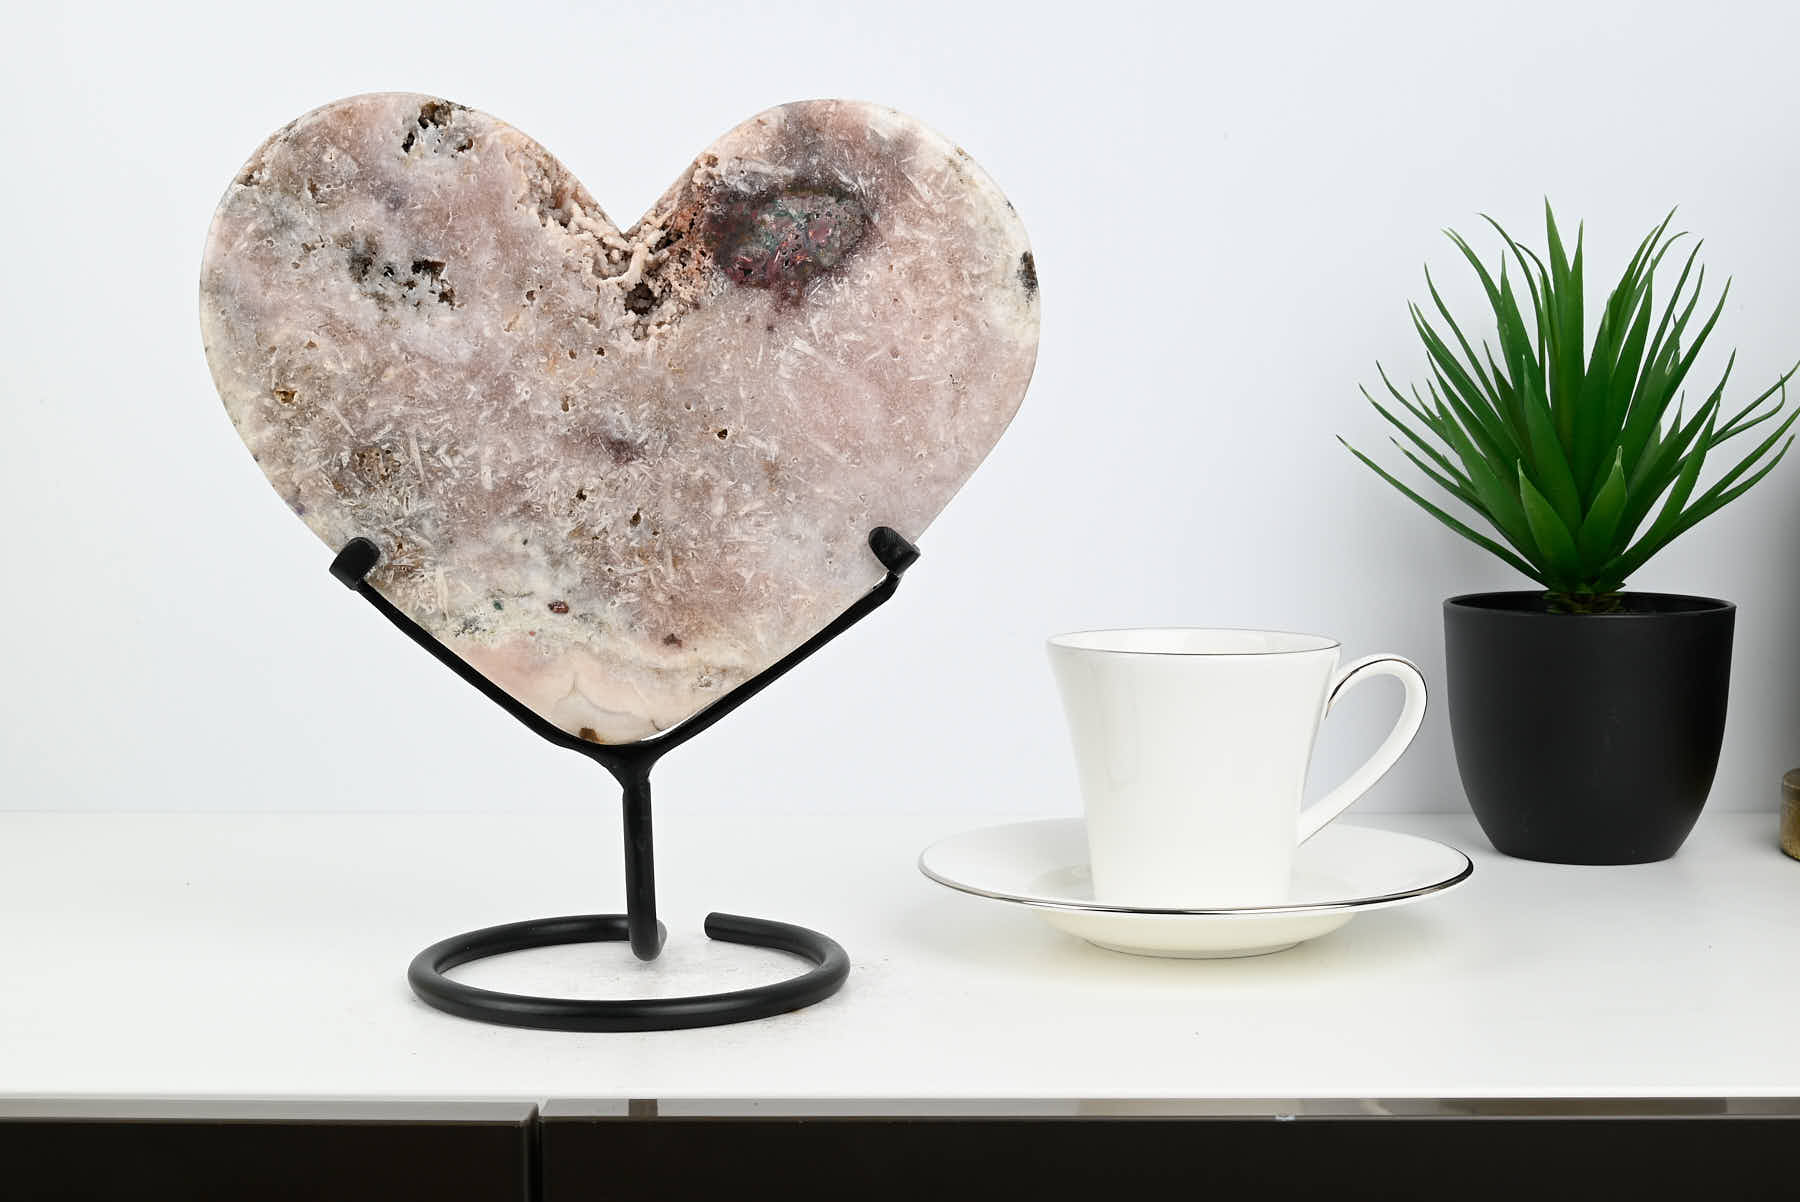 Extra Quality Pink Amethyst Heart - 2.21kg, 24cm high - #HTPINK-34026